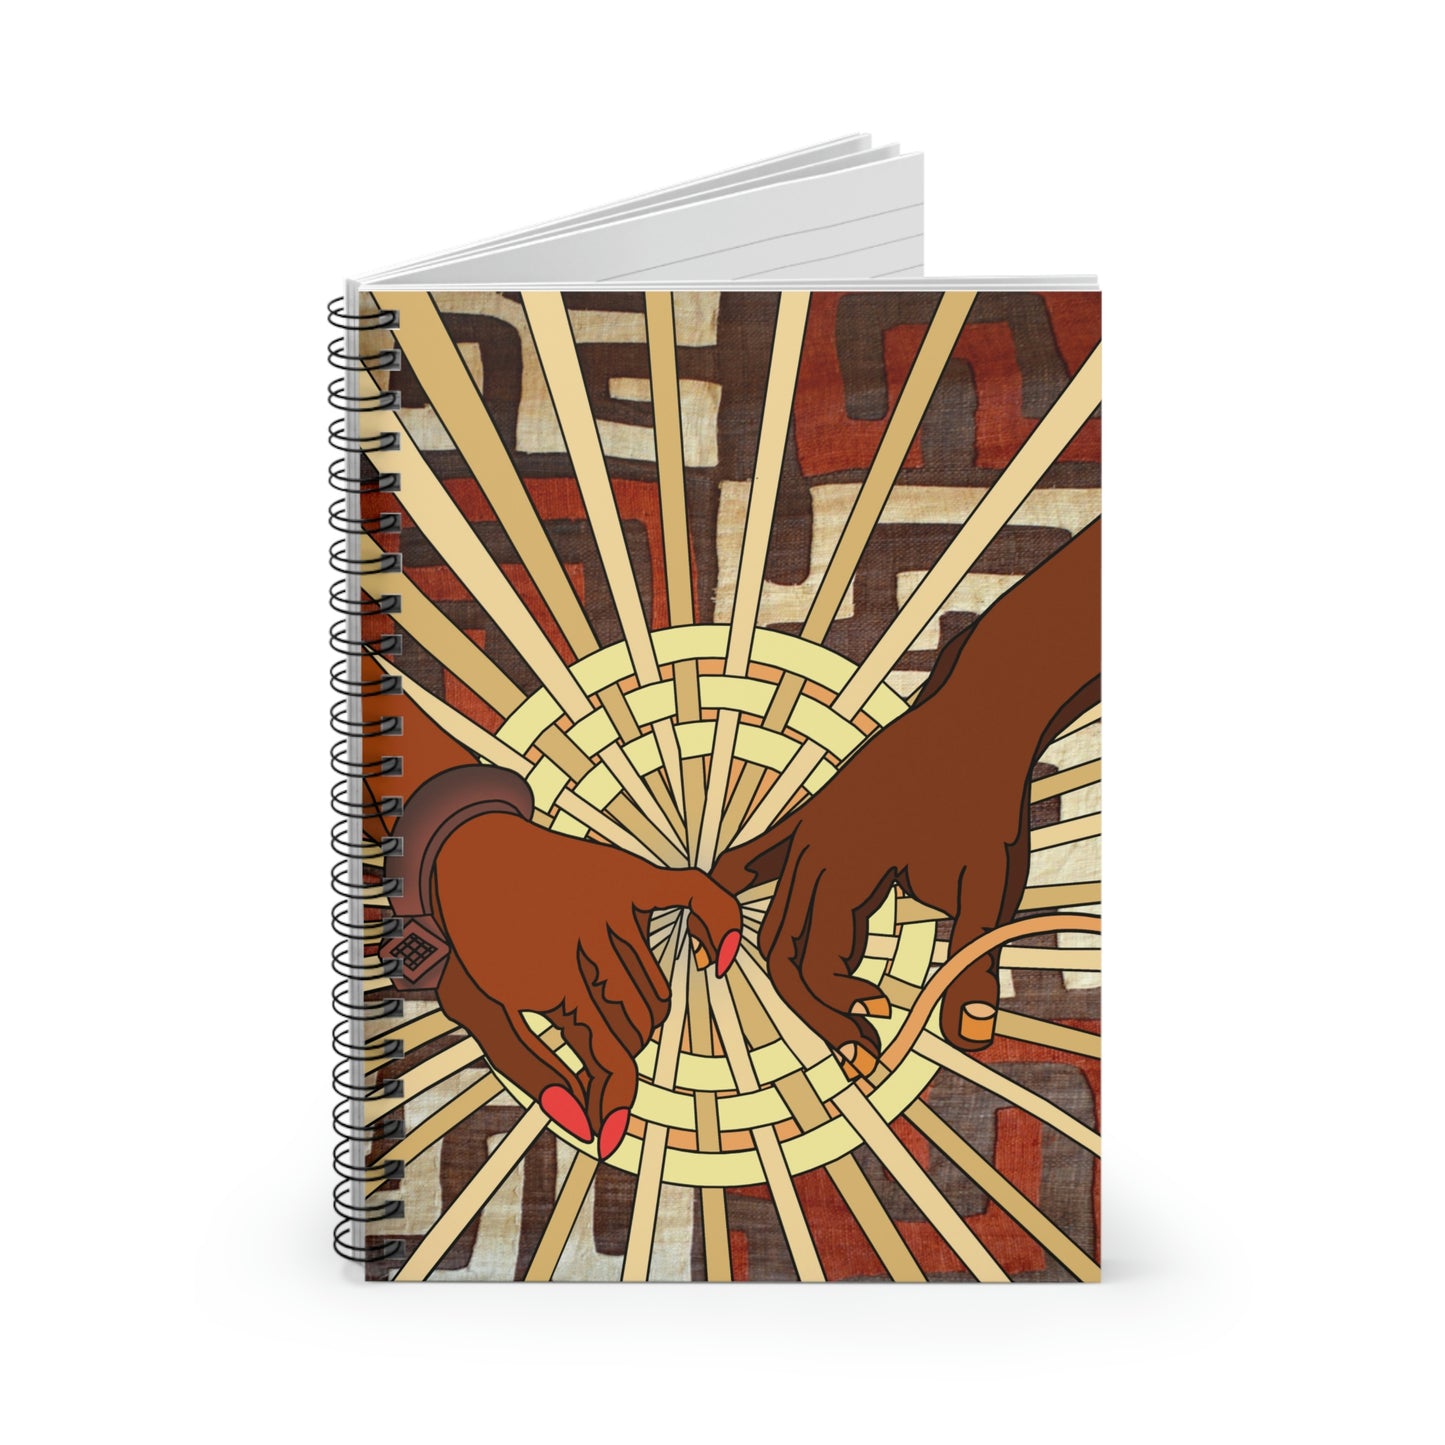 A Show of Hands!! Spiral Notebook - Ruled Line